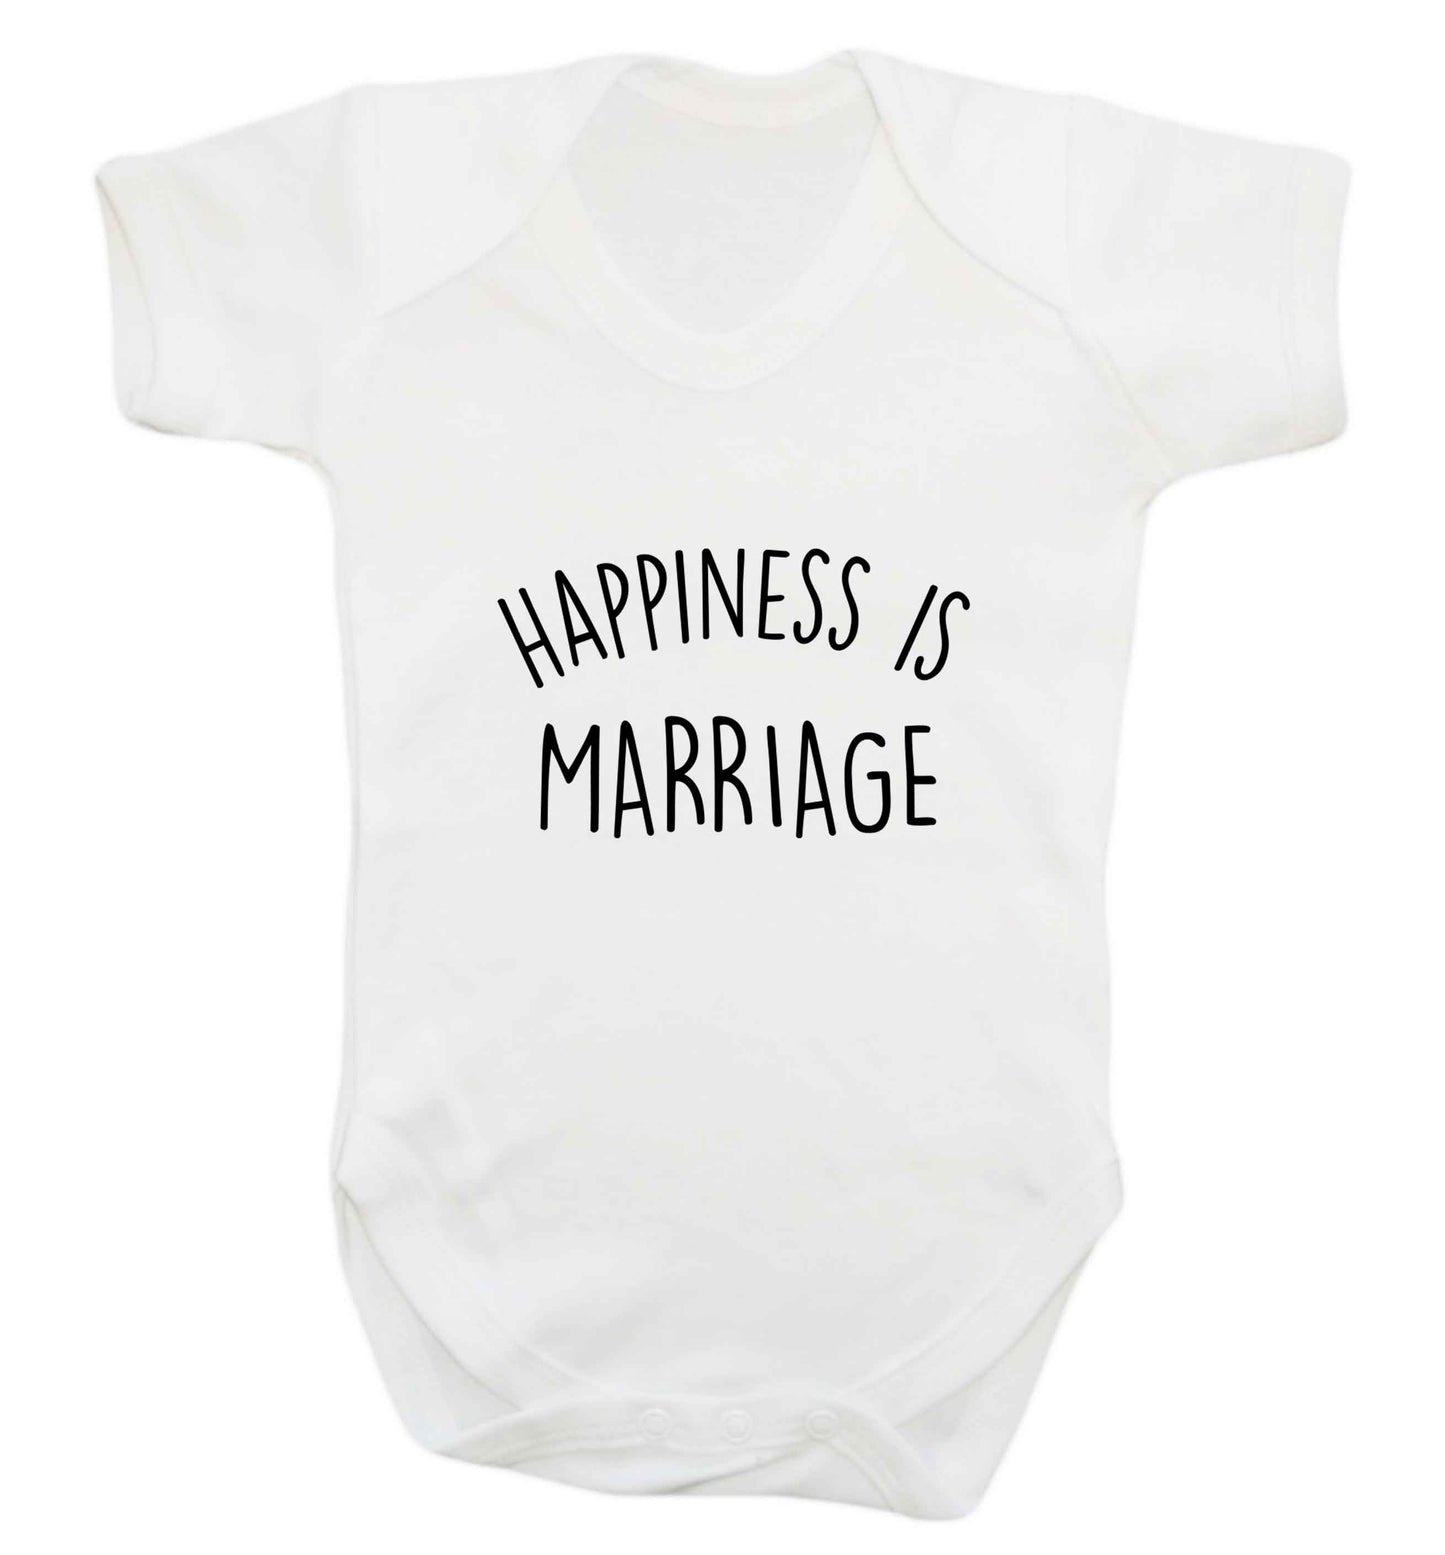 Happiness is marriage baby vest white 18-24 months